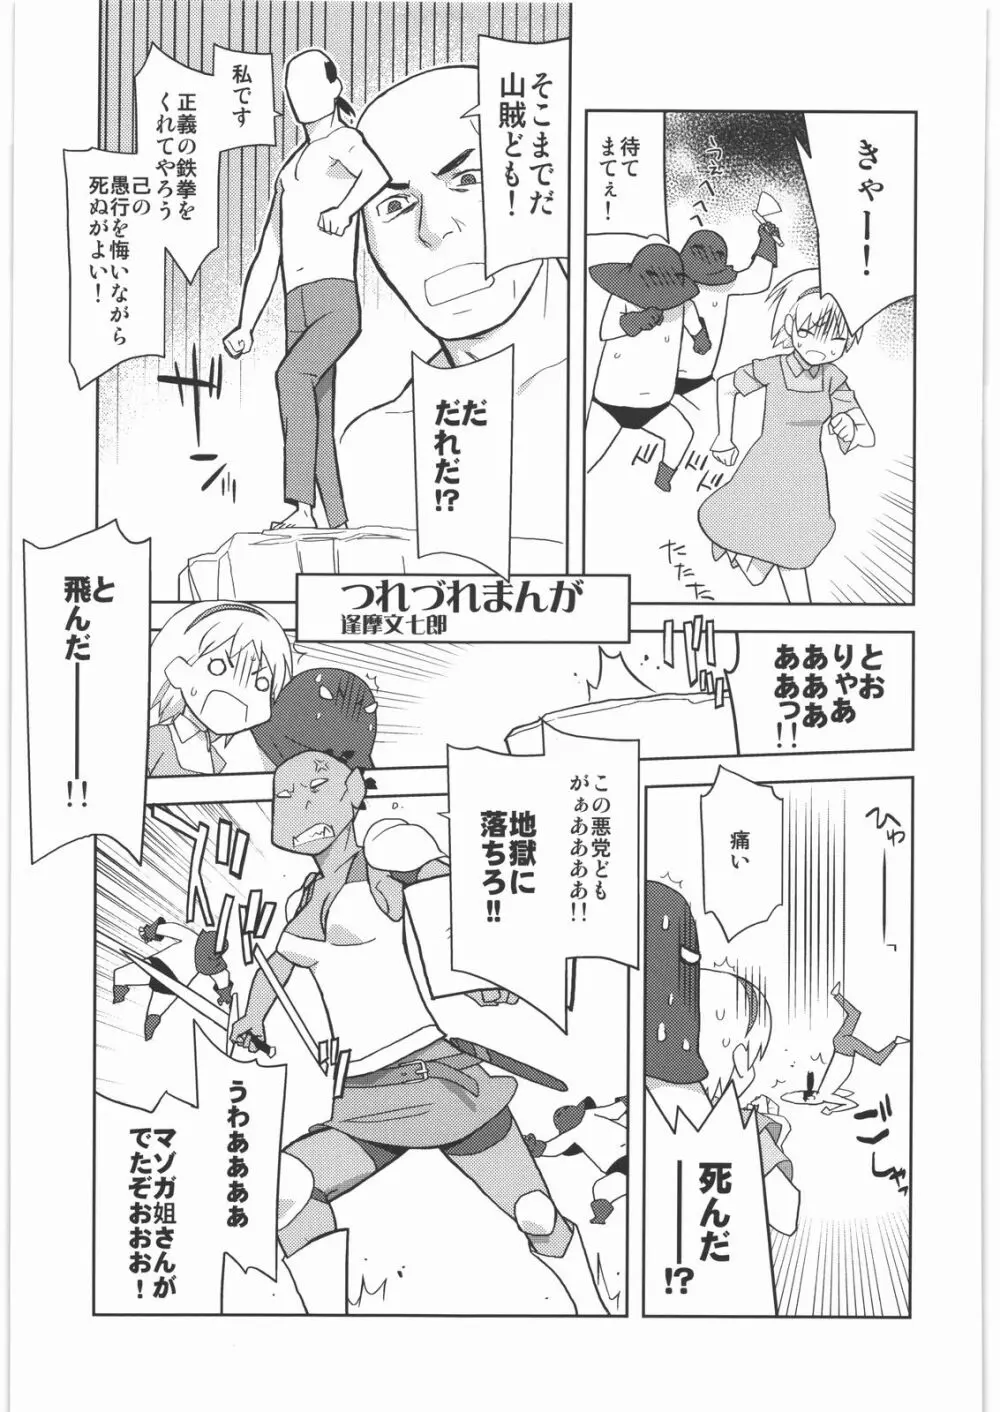 甲冑通信 弐之號 Page.28